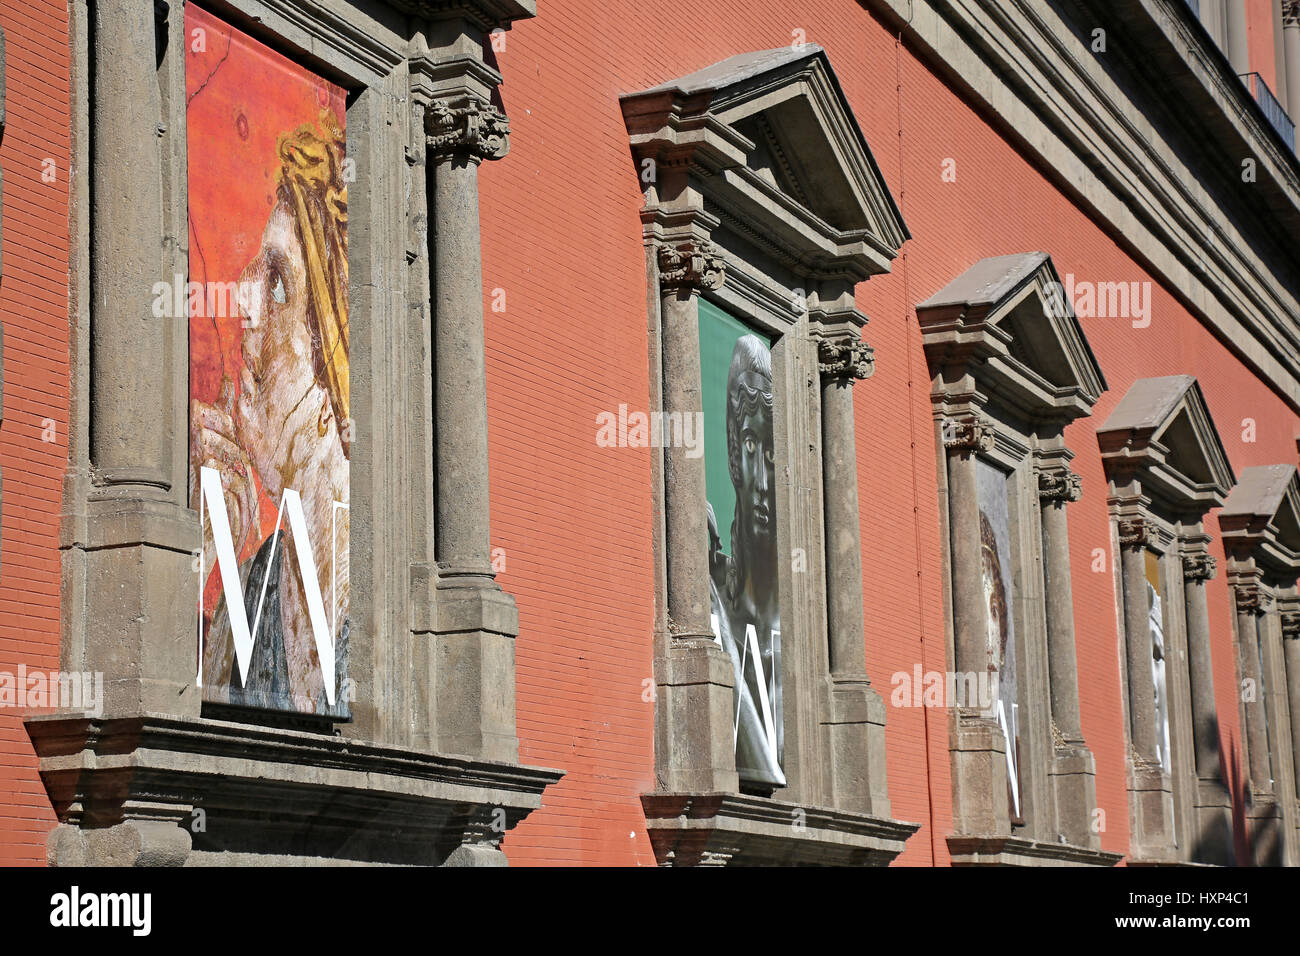 Naples, Italy, 02/21/2017:The Naples National Archaeological Museum is the most important Italian archaeological museum and is considered one of the m Stock Photo